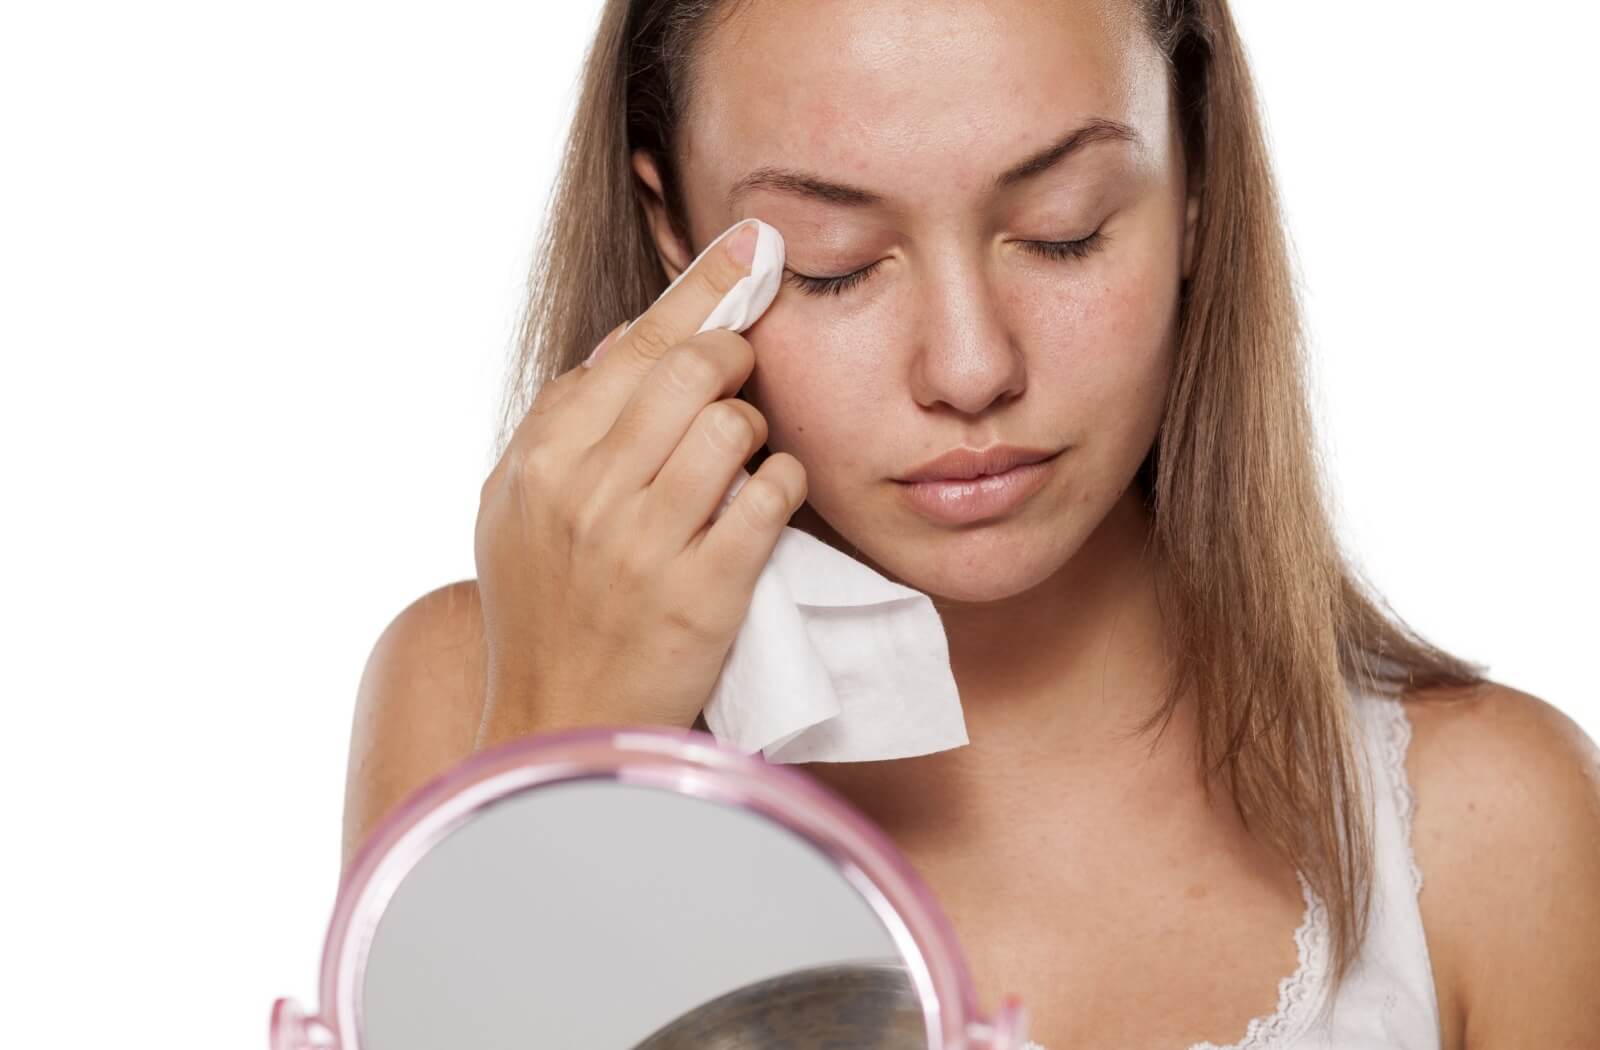 A woman using eyelid wipes to treat meibomian gland dysfunction